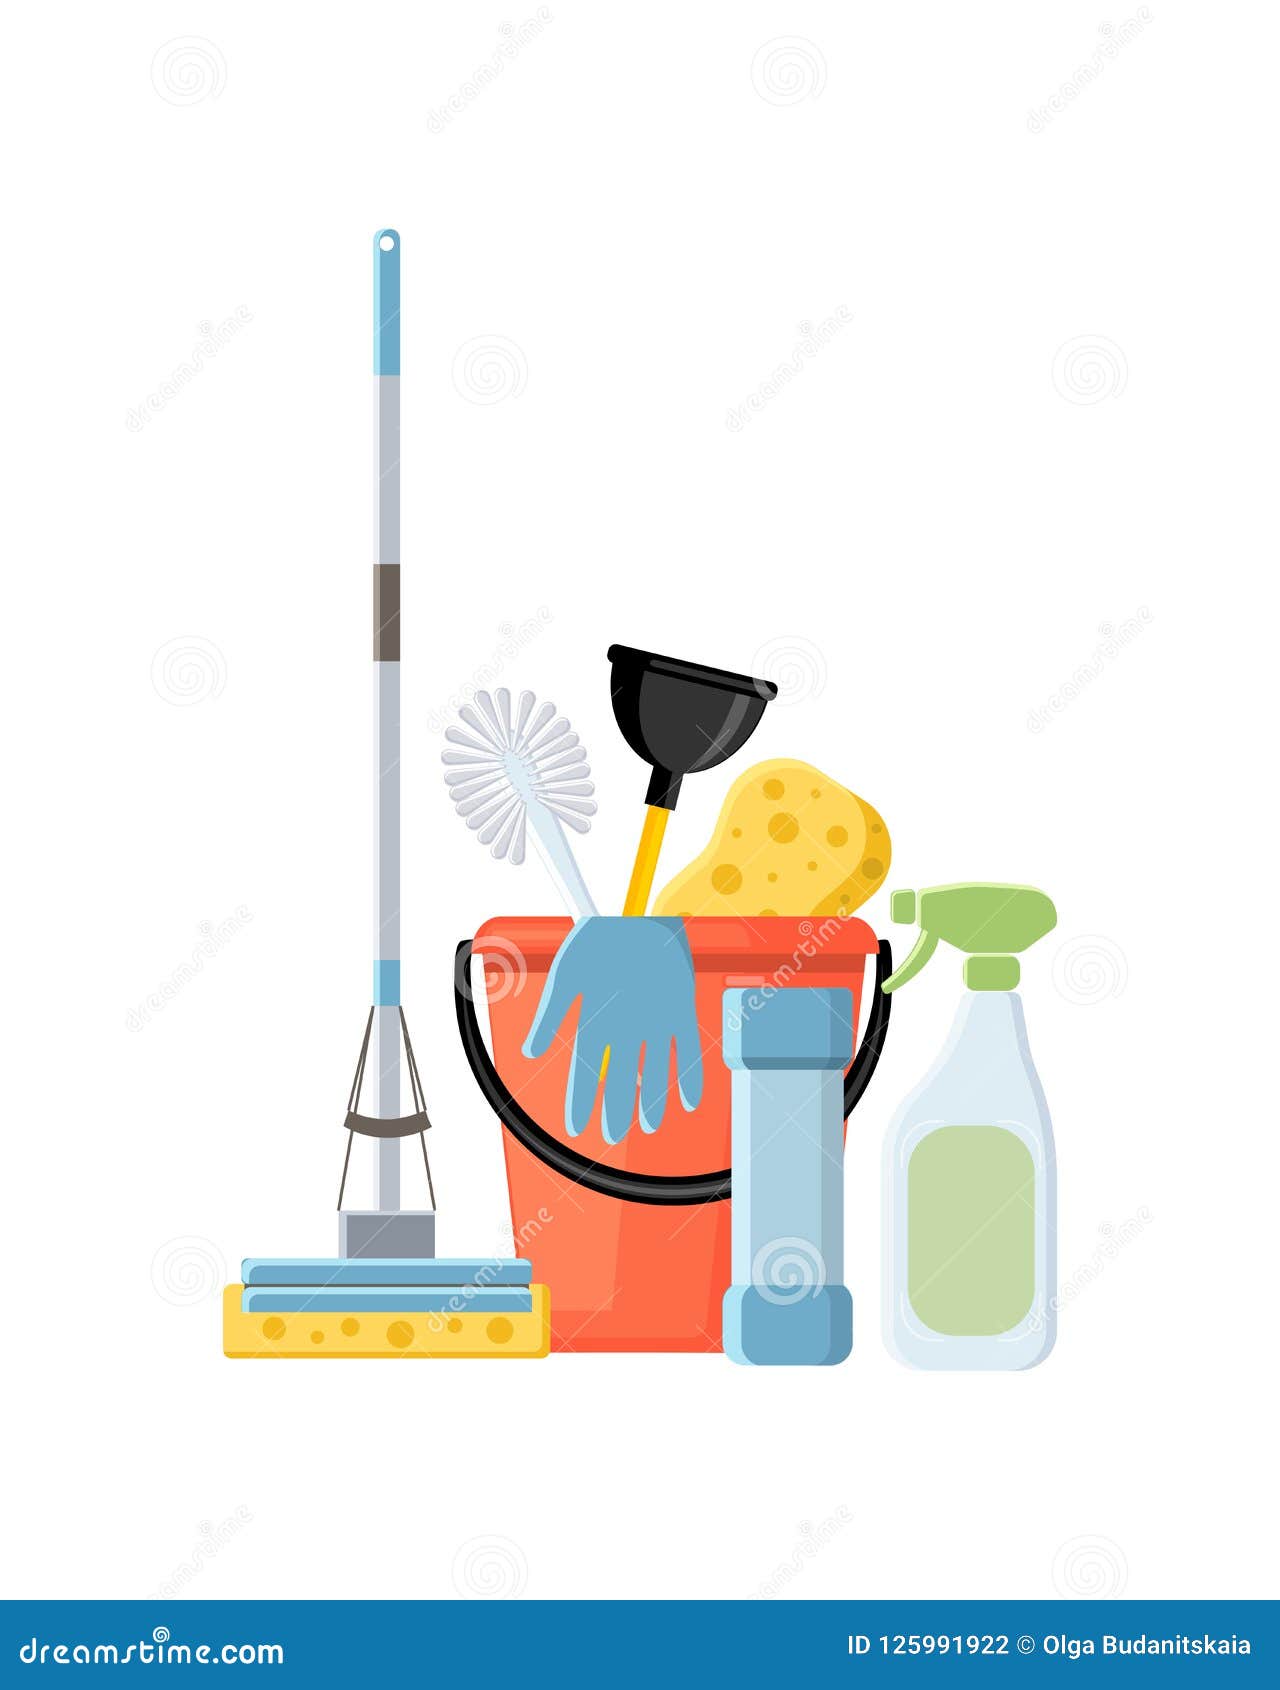 https://thumbs.dreamstime.com/z/cleaning-supplies-flat-cartoon-style-vector-illustration-isolated-white-background-mop-sponge-detergent-bucket-brush-isol-125991922.jpg